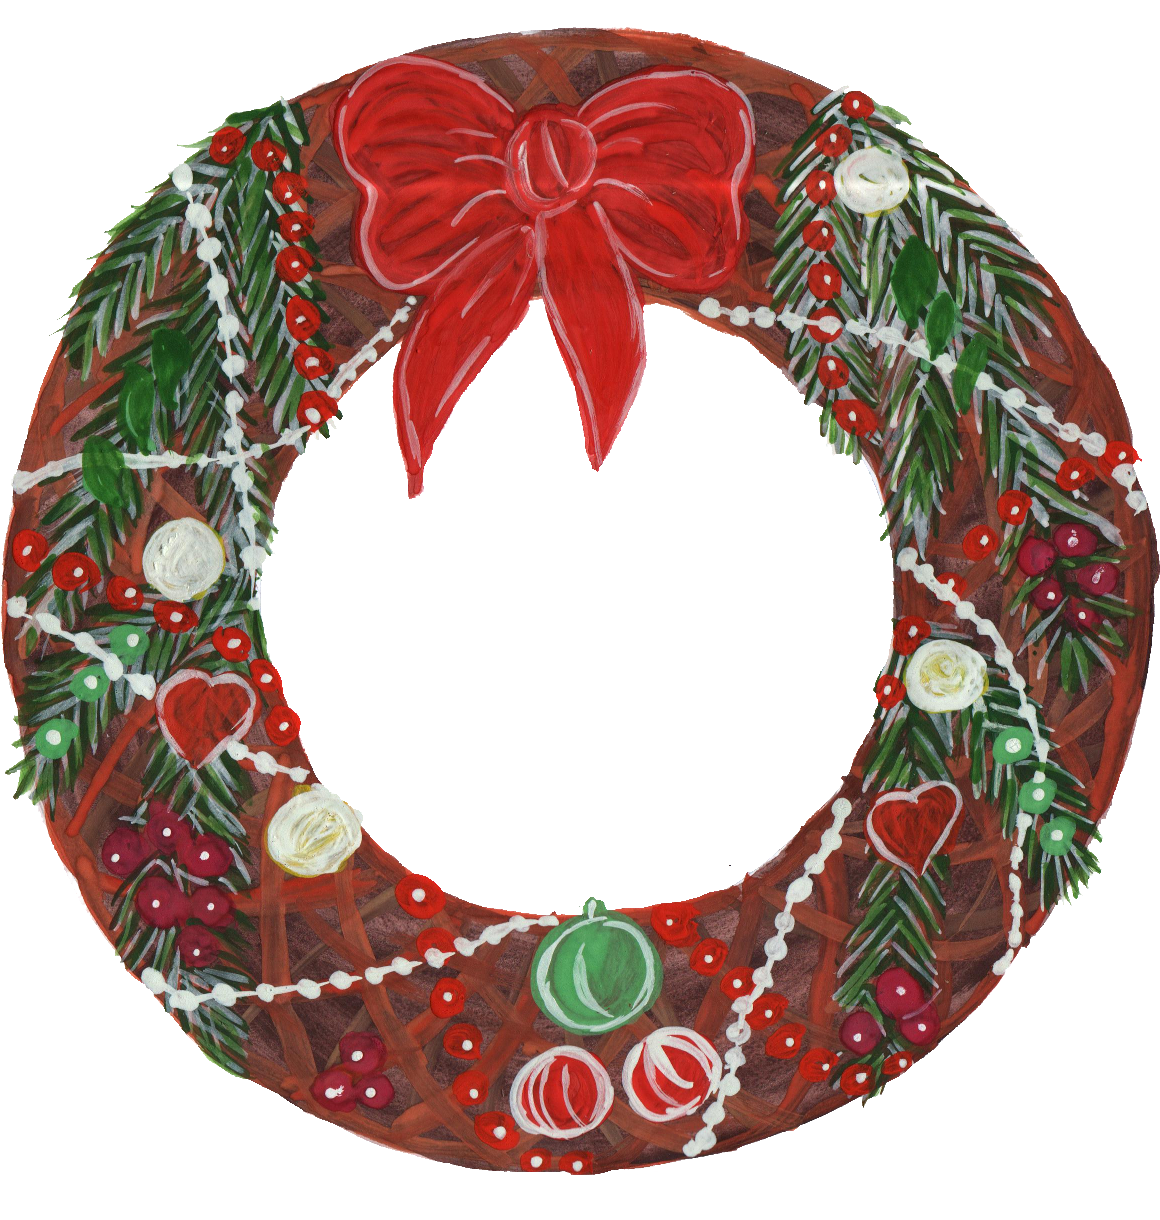 Watercolor Wreath Christmas Free Download Image PNG Image